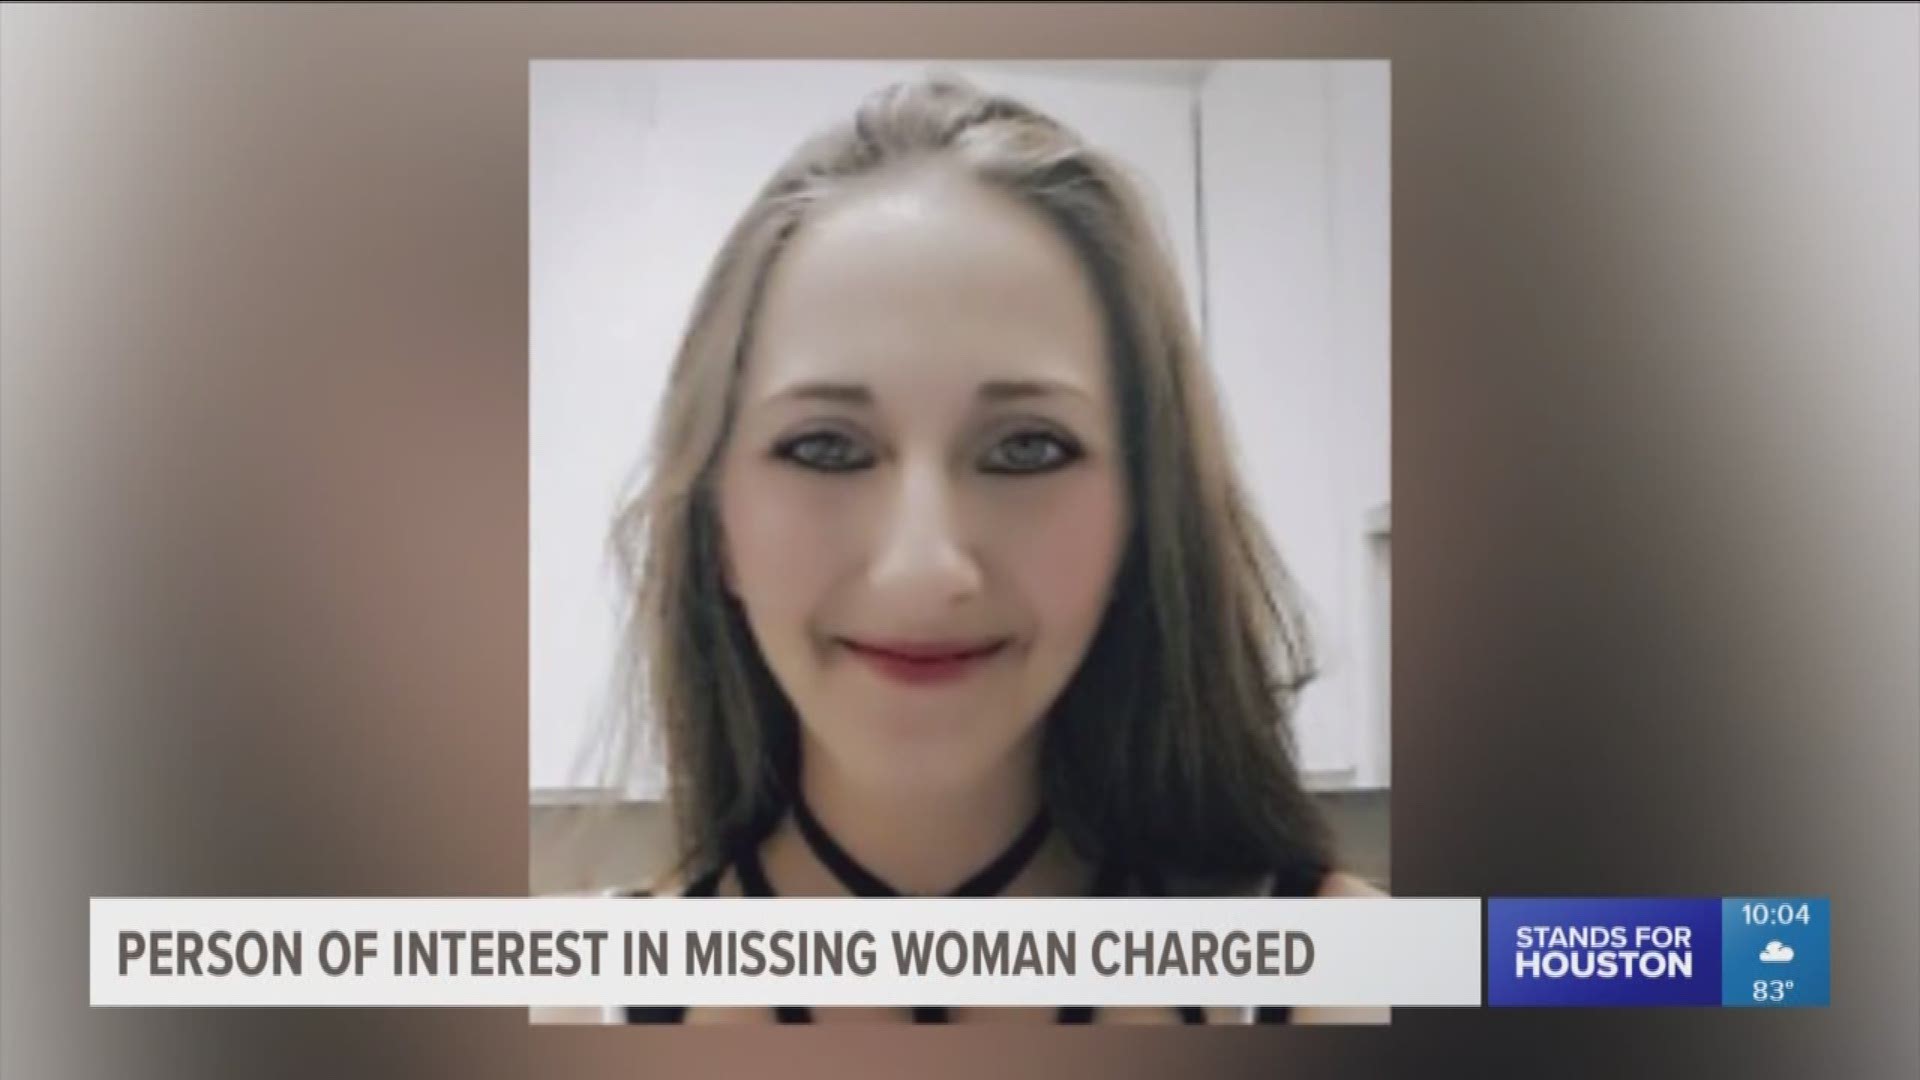 Man Charged With Murder In Case Of Missing 37 Year Old Woman